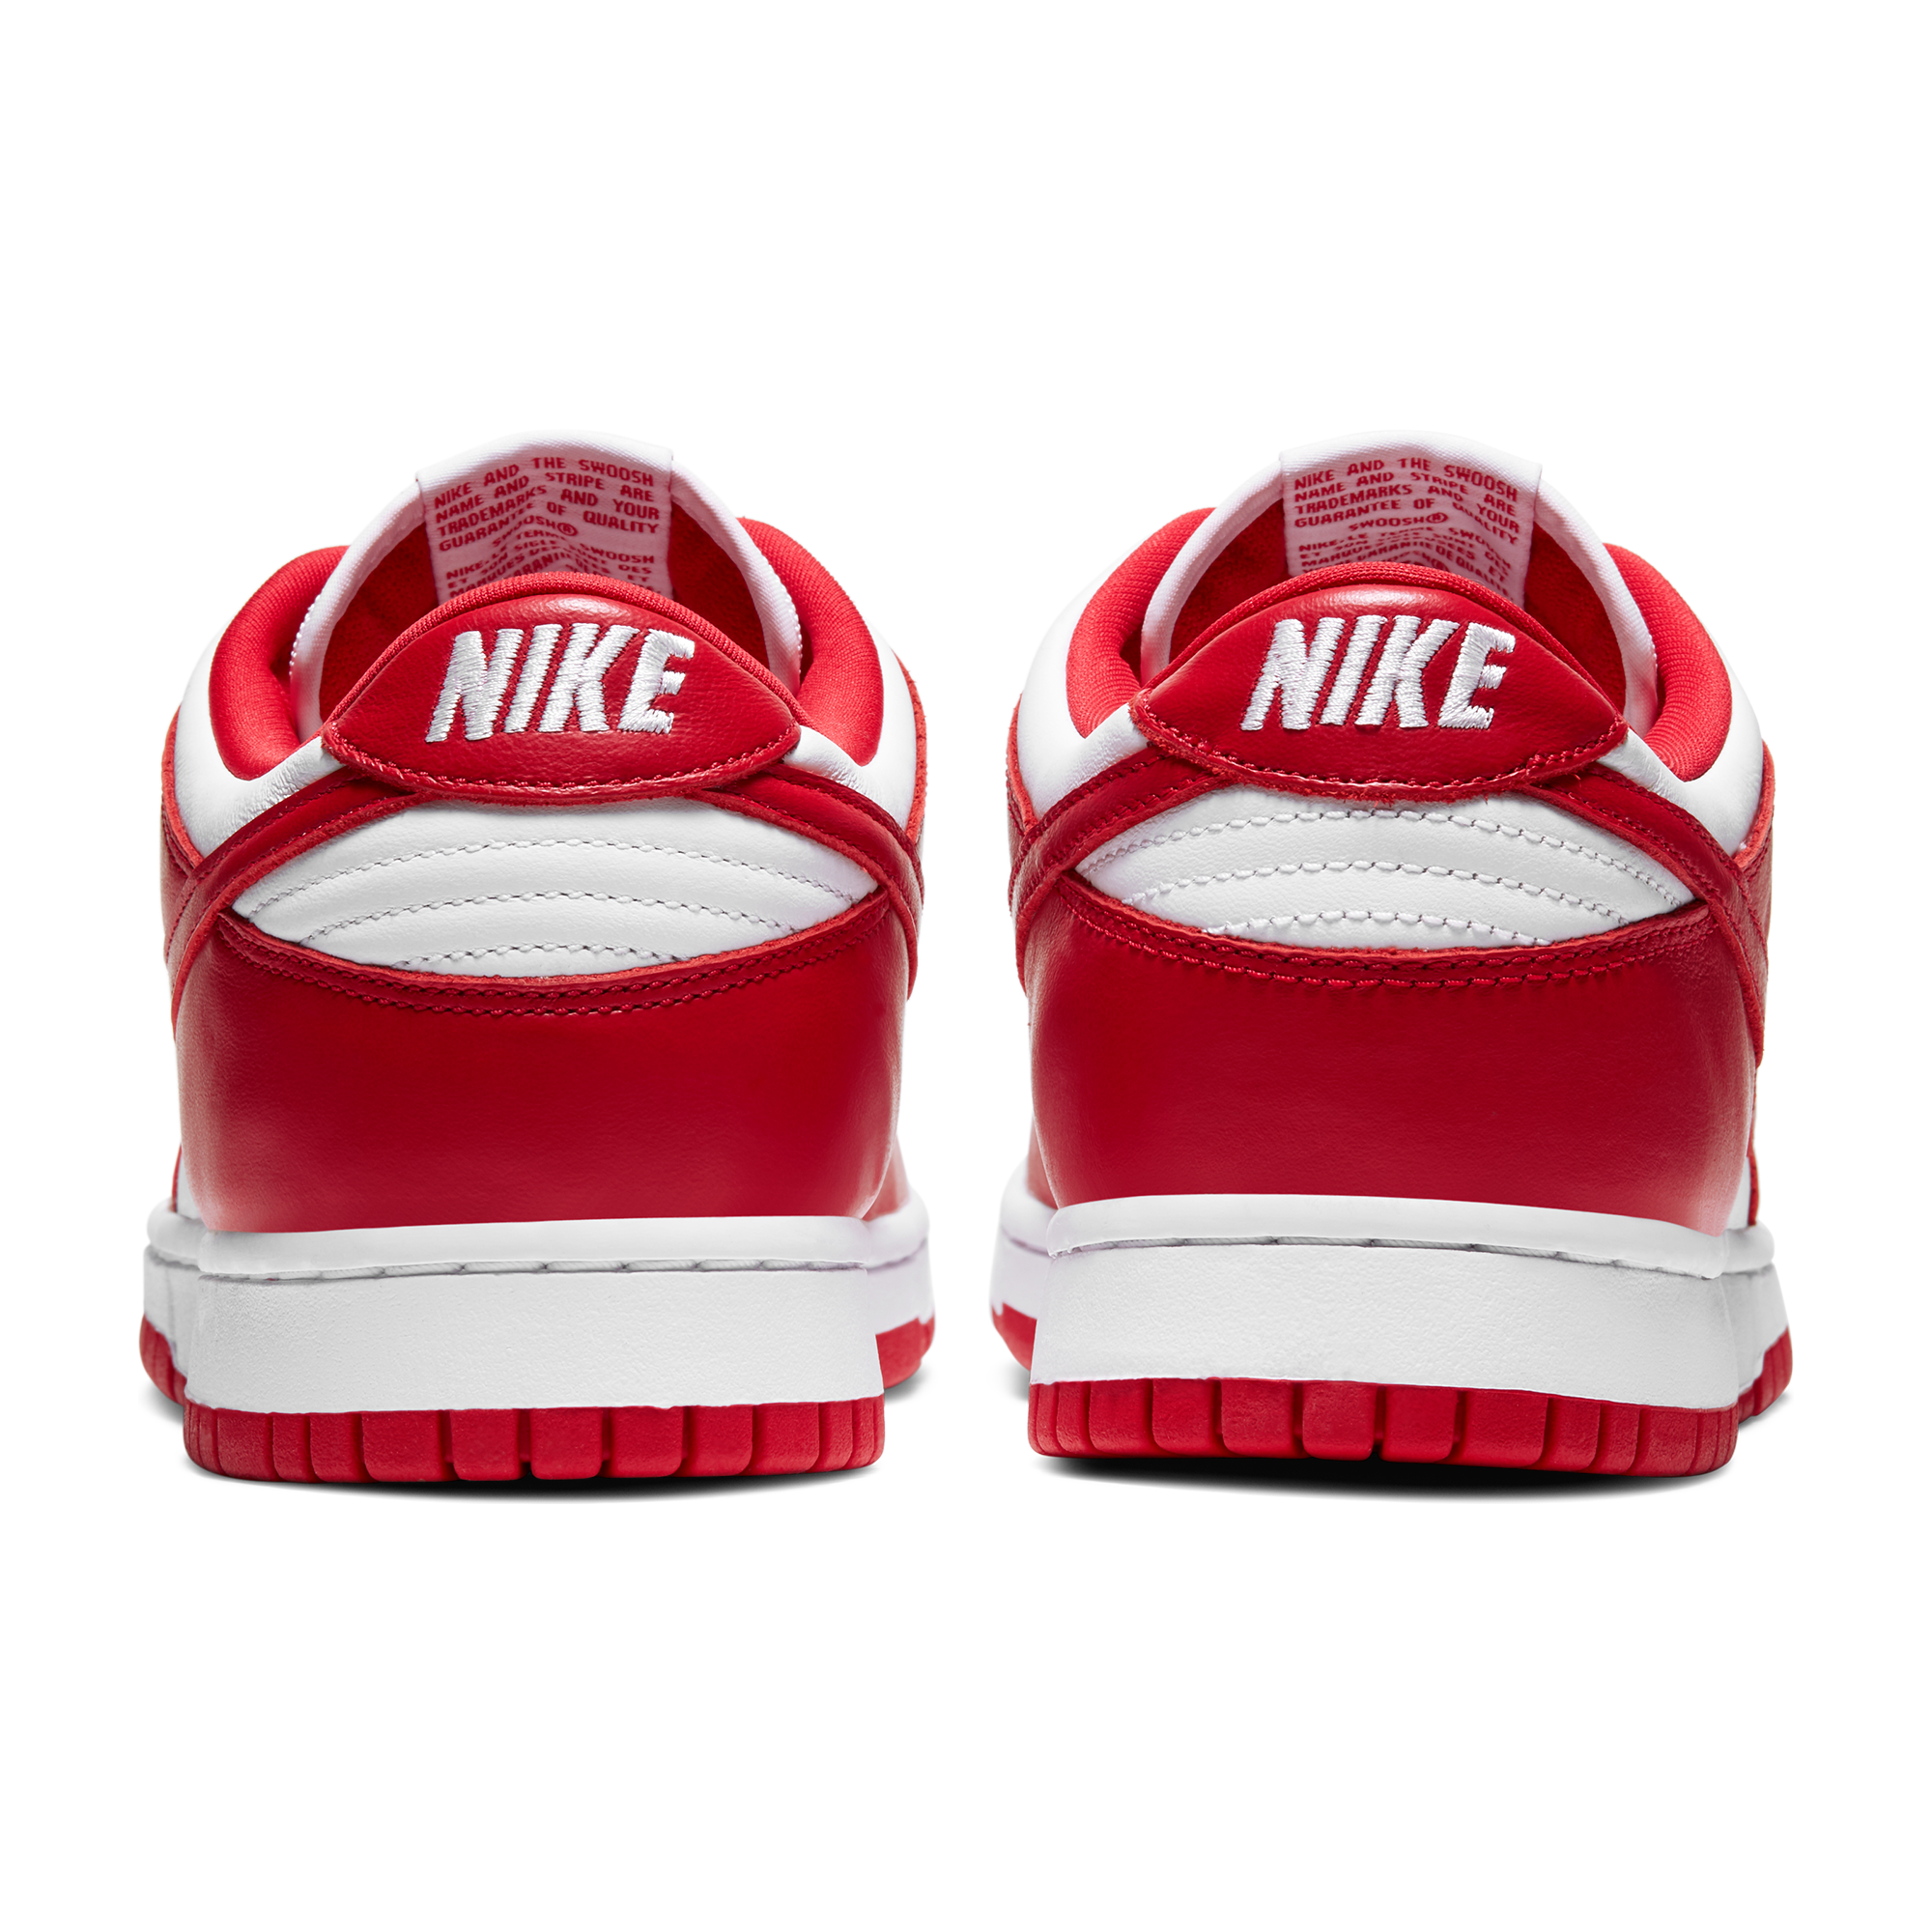 Nike Dunk Low 'University Red' Concepts